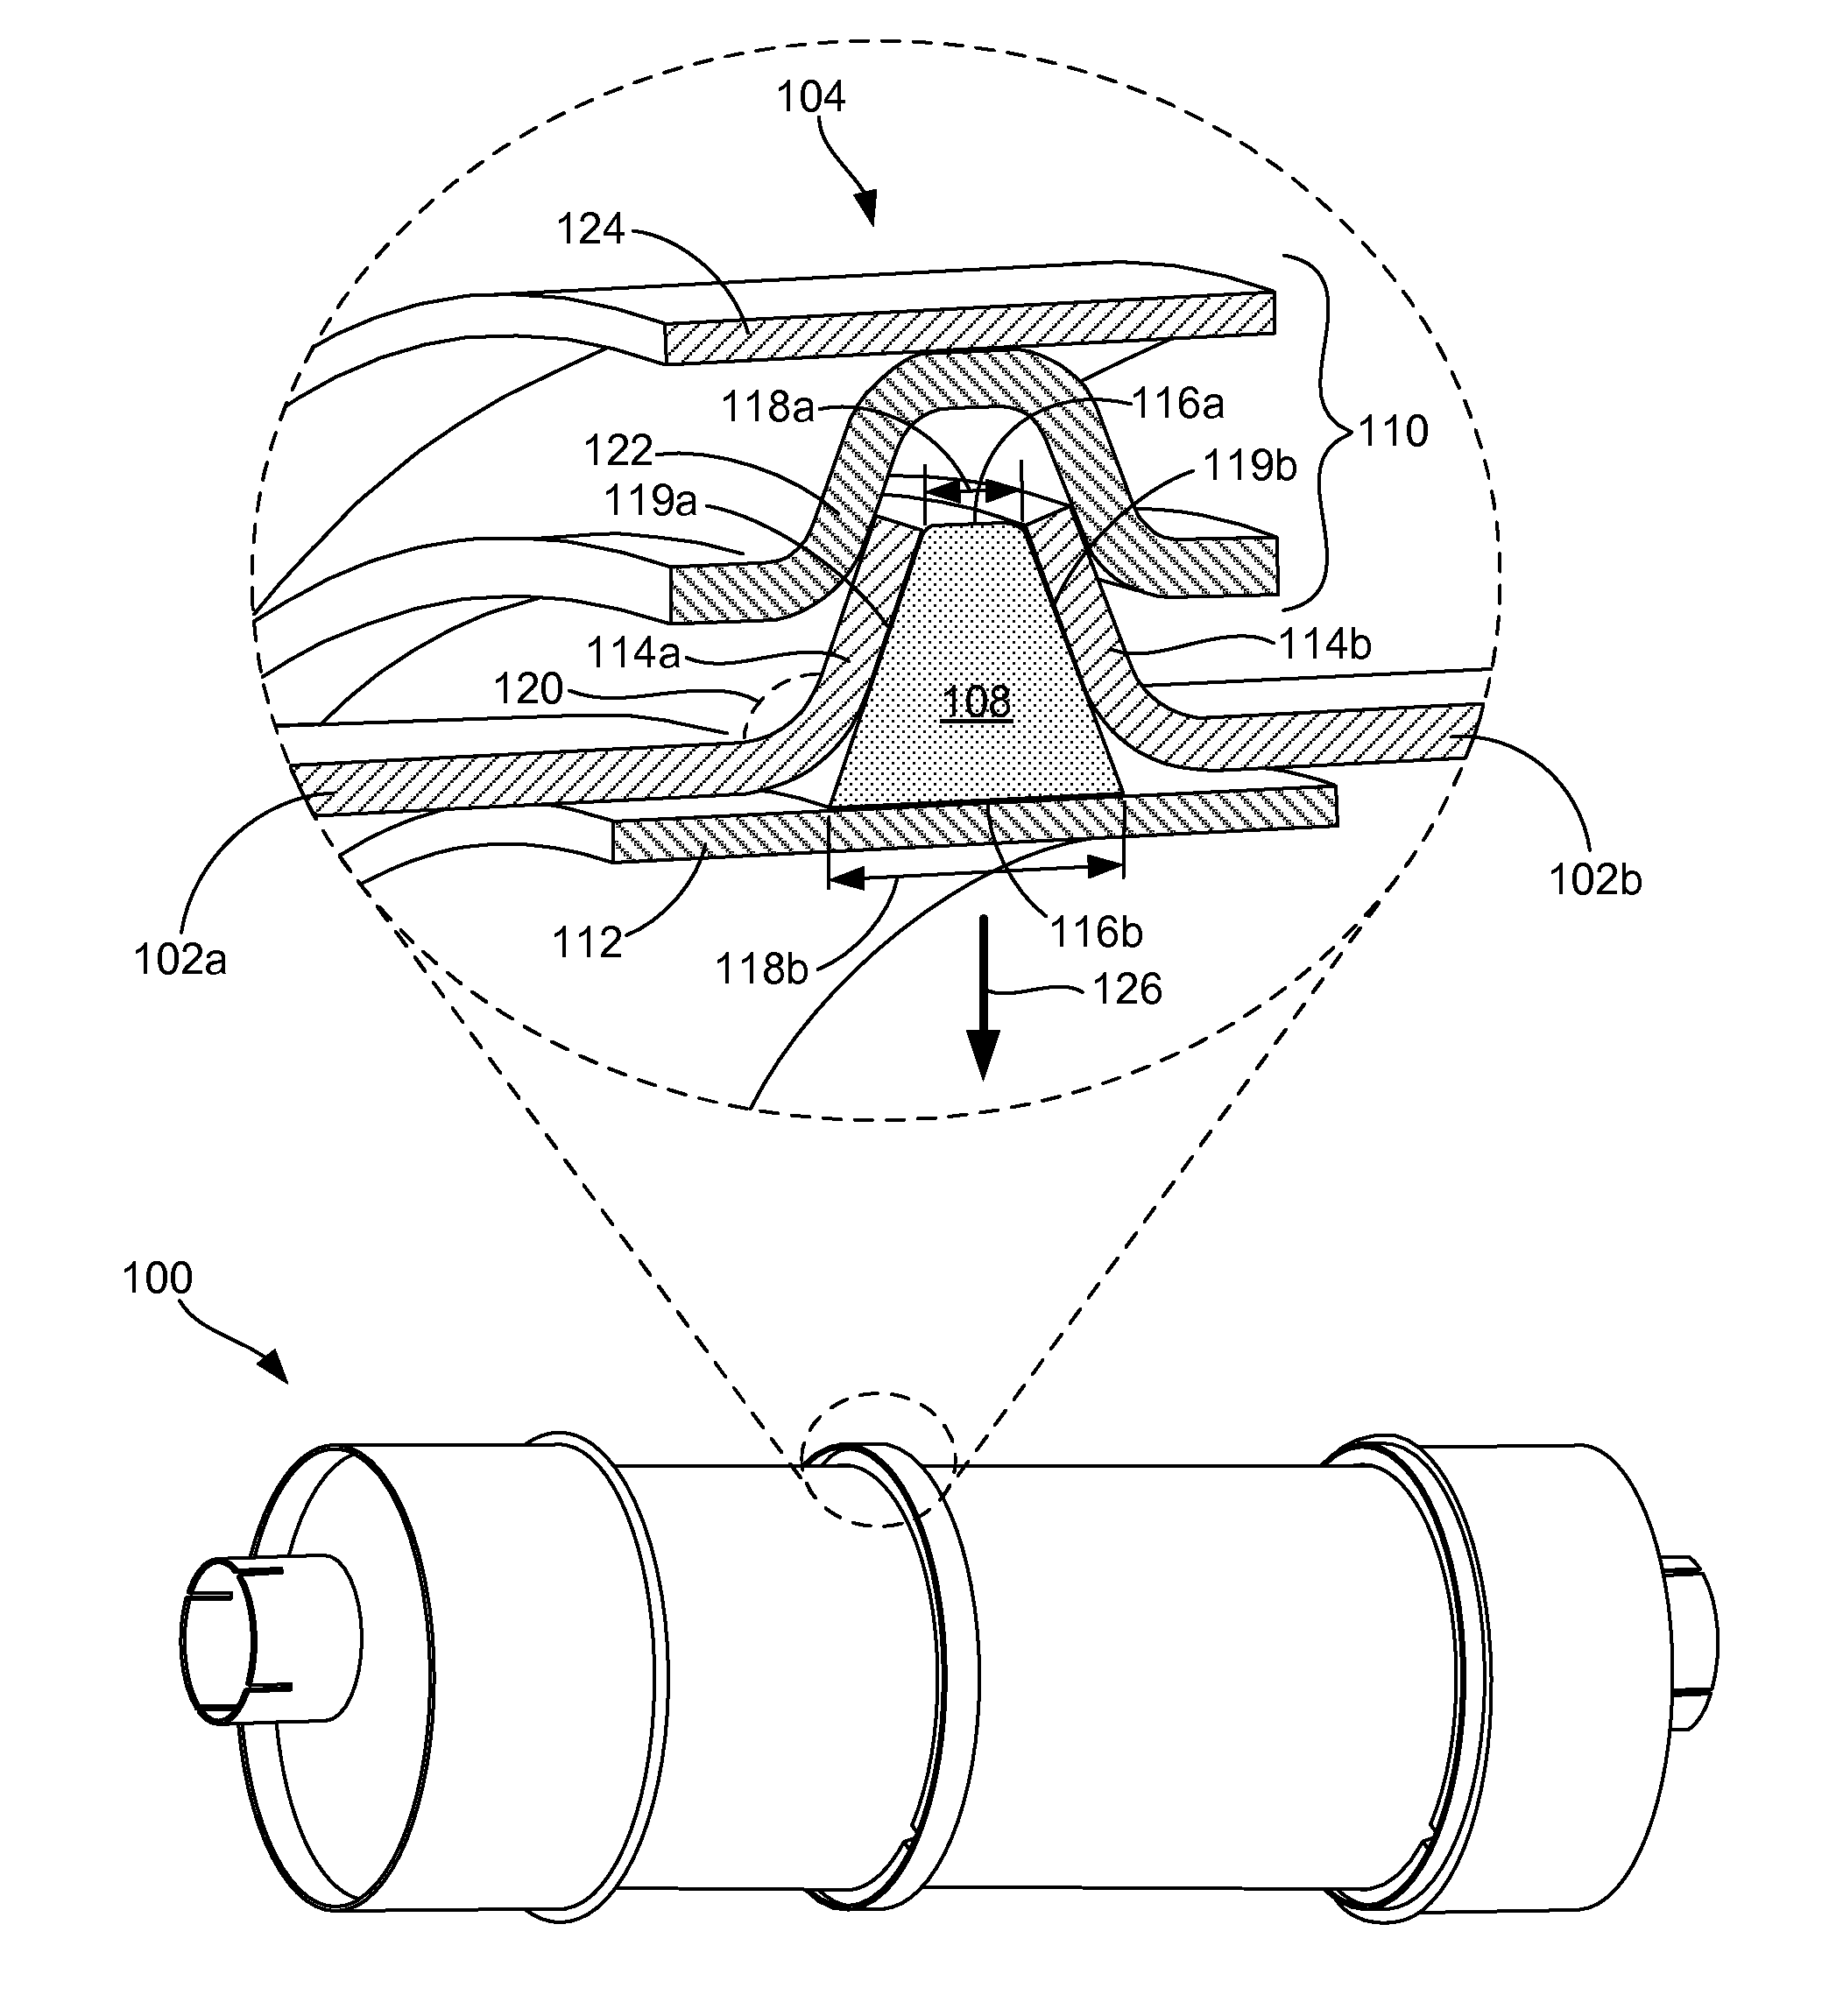 Tapered annular gasket and joint for use of same